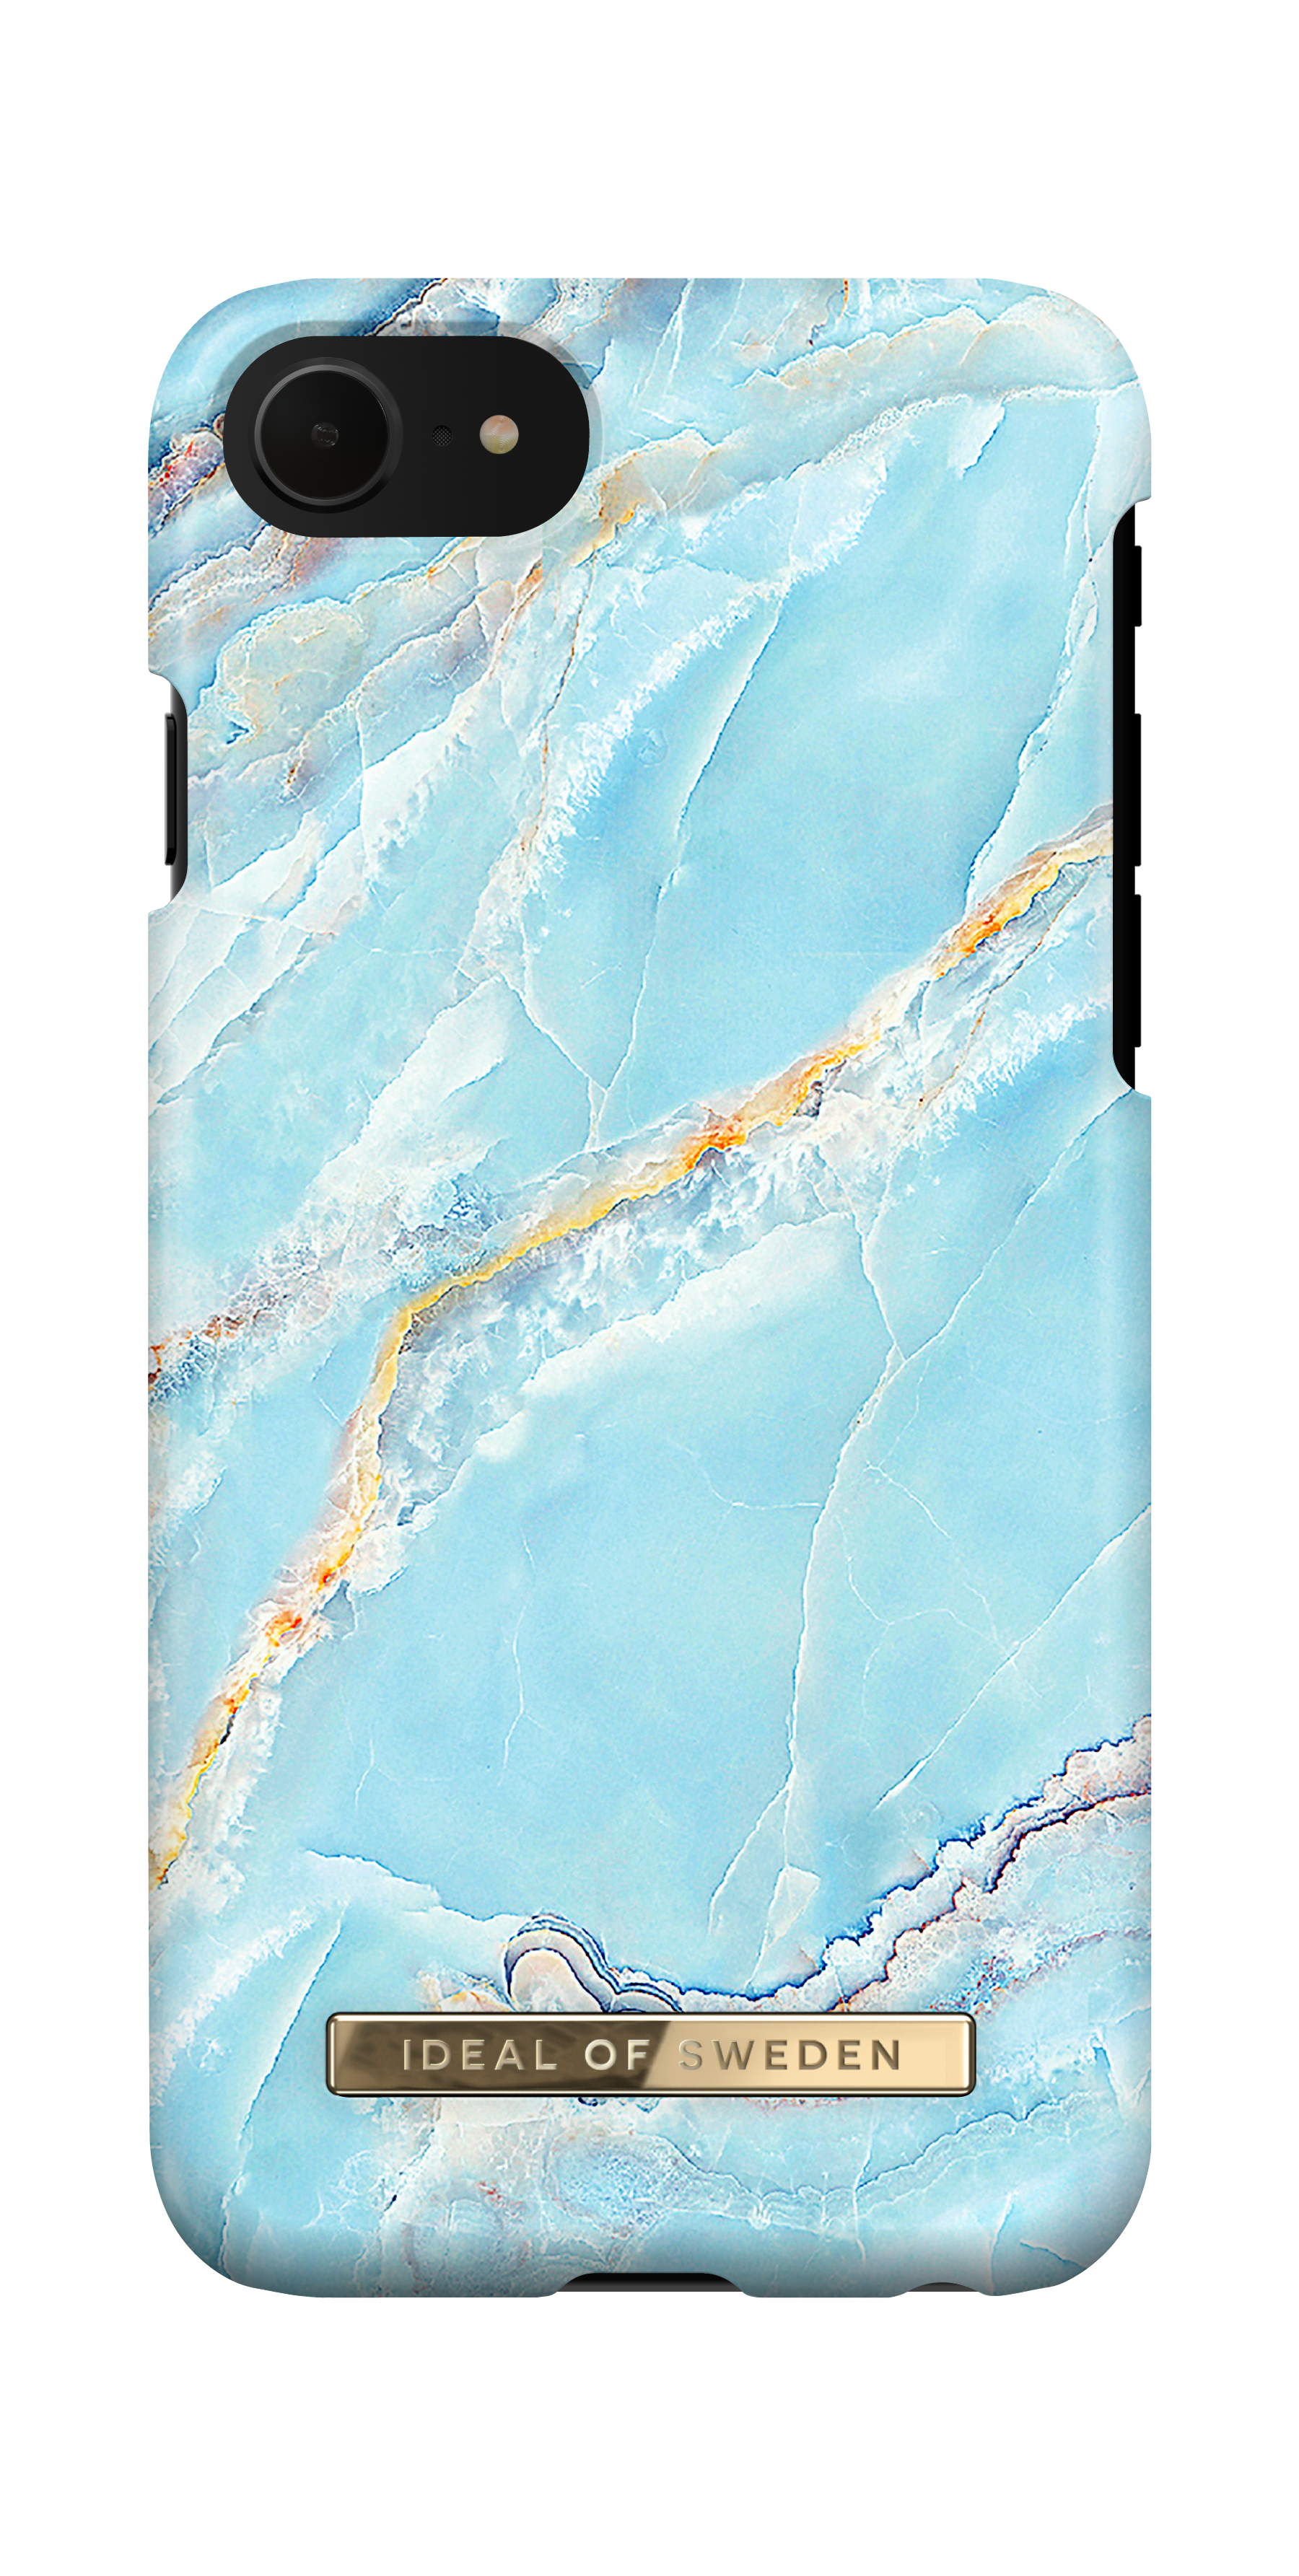 IDEAL OF Island IPhone 8/7/6/6s/SE, Marble Backcover, Paradise Apple, IDFCS17-I7-57, SWEDEN